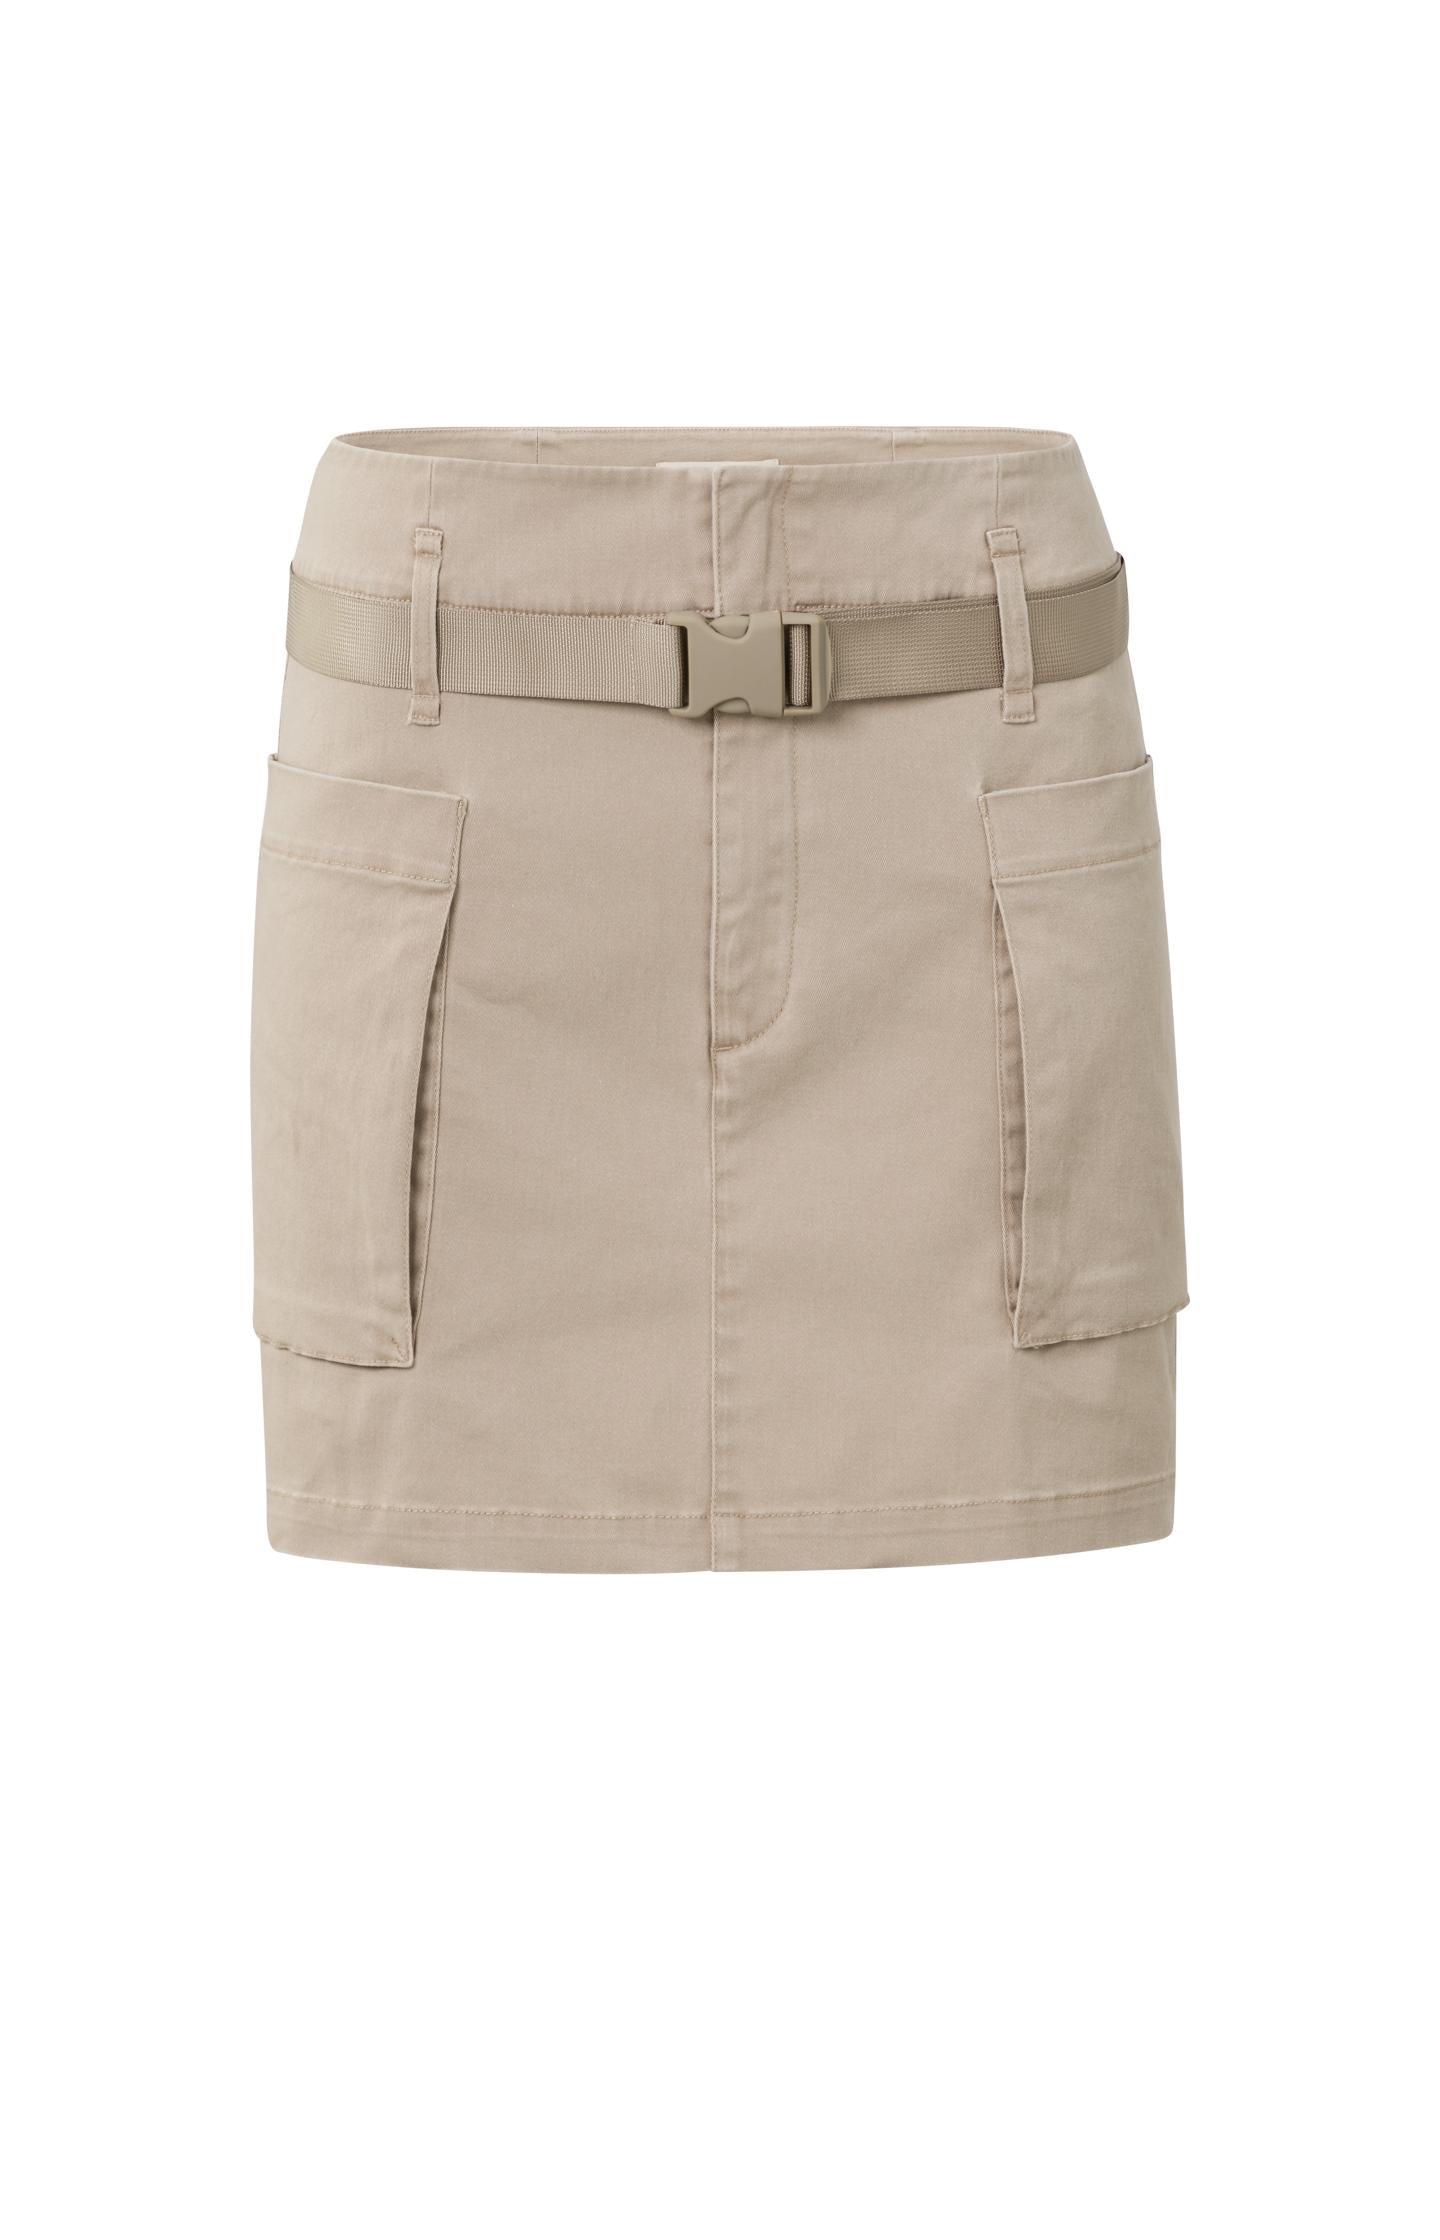 Cargo mini skirt with cargo belt, pockets and zip fly - Type: product